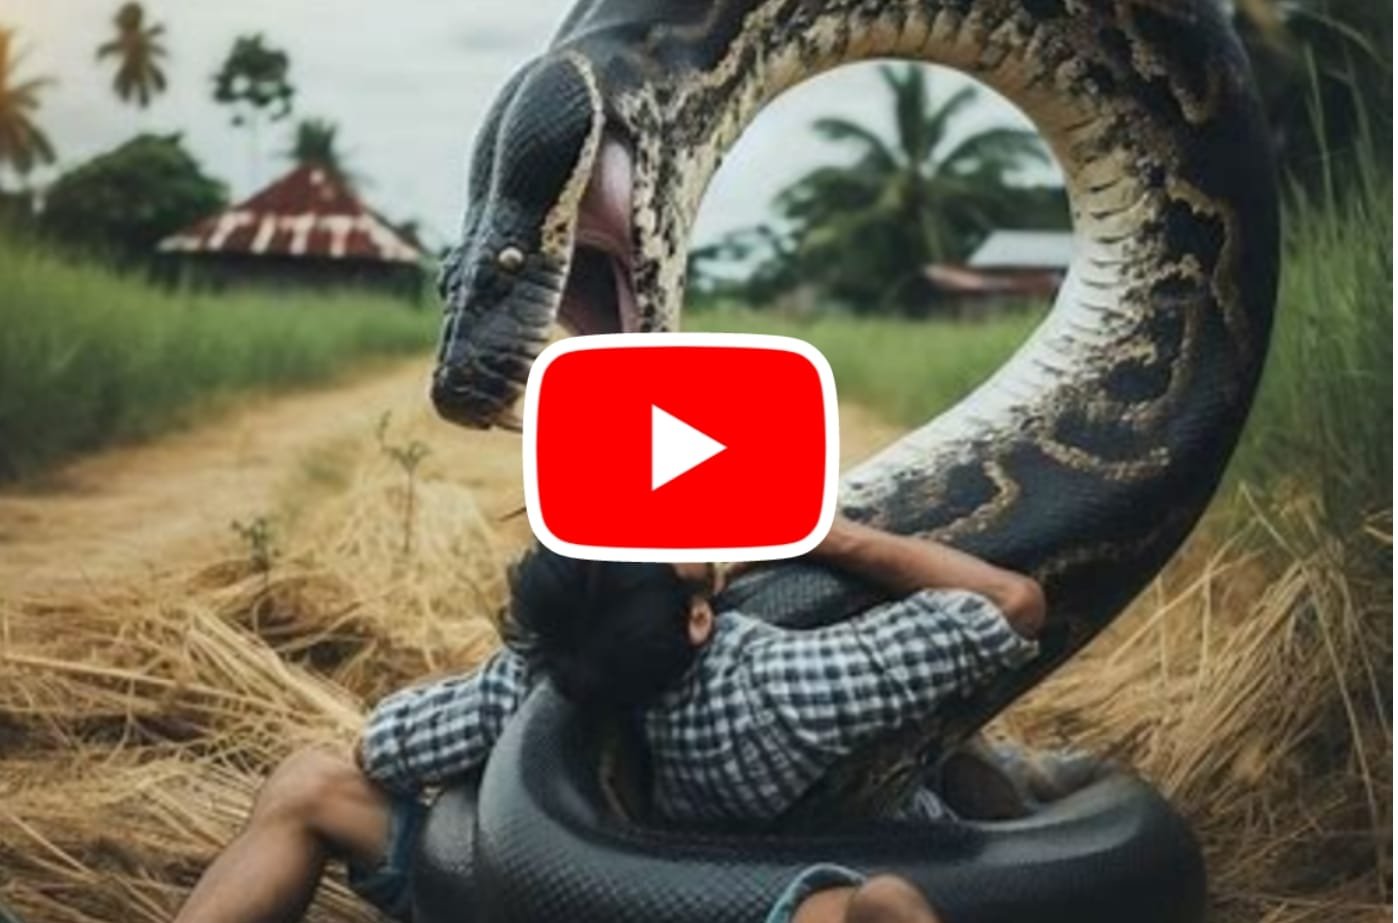 Python Attack: A giant python caught hold of a man sitting in the field, the struggle lasted for 20 minutes.